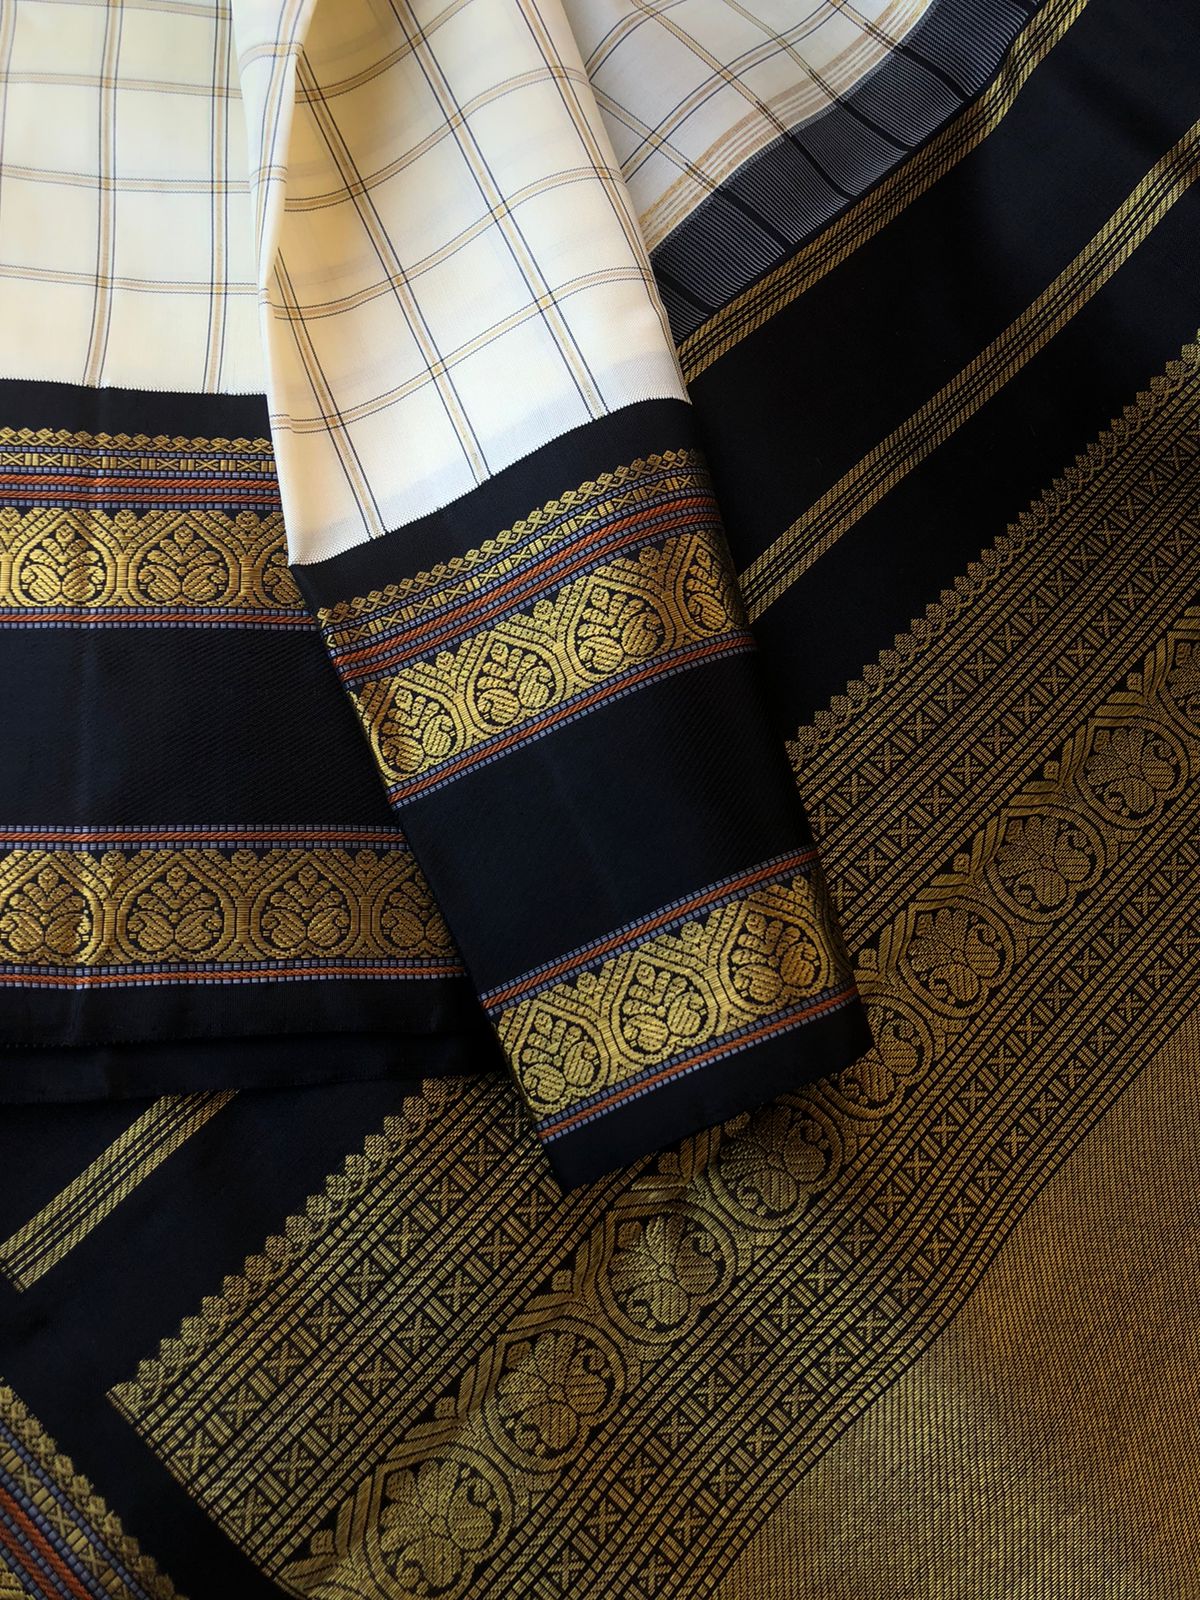 Vintage Ragas on Kanchivaram - the most beautiful creamy off white and black a absolutely vintage Jada nagam woven borders